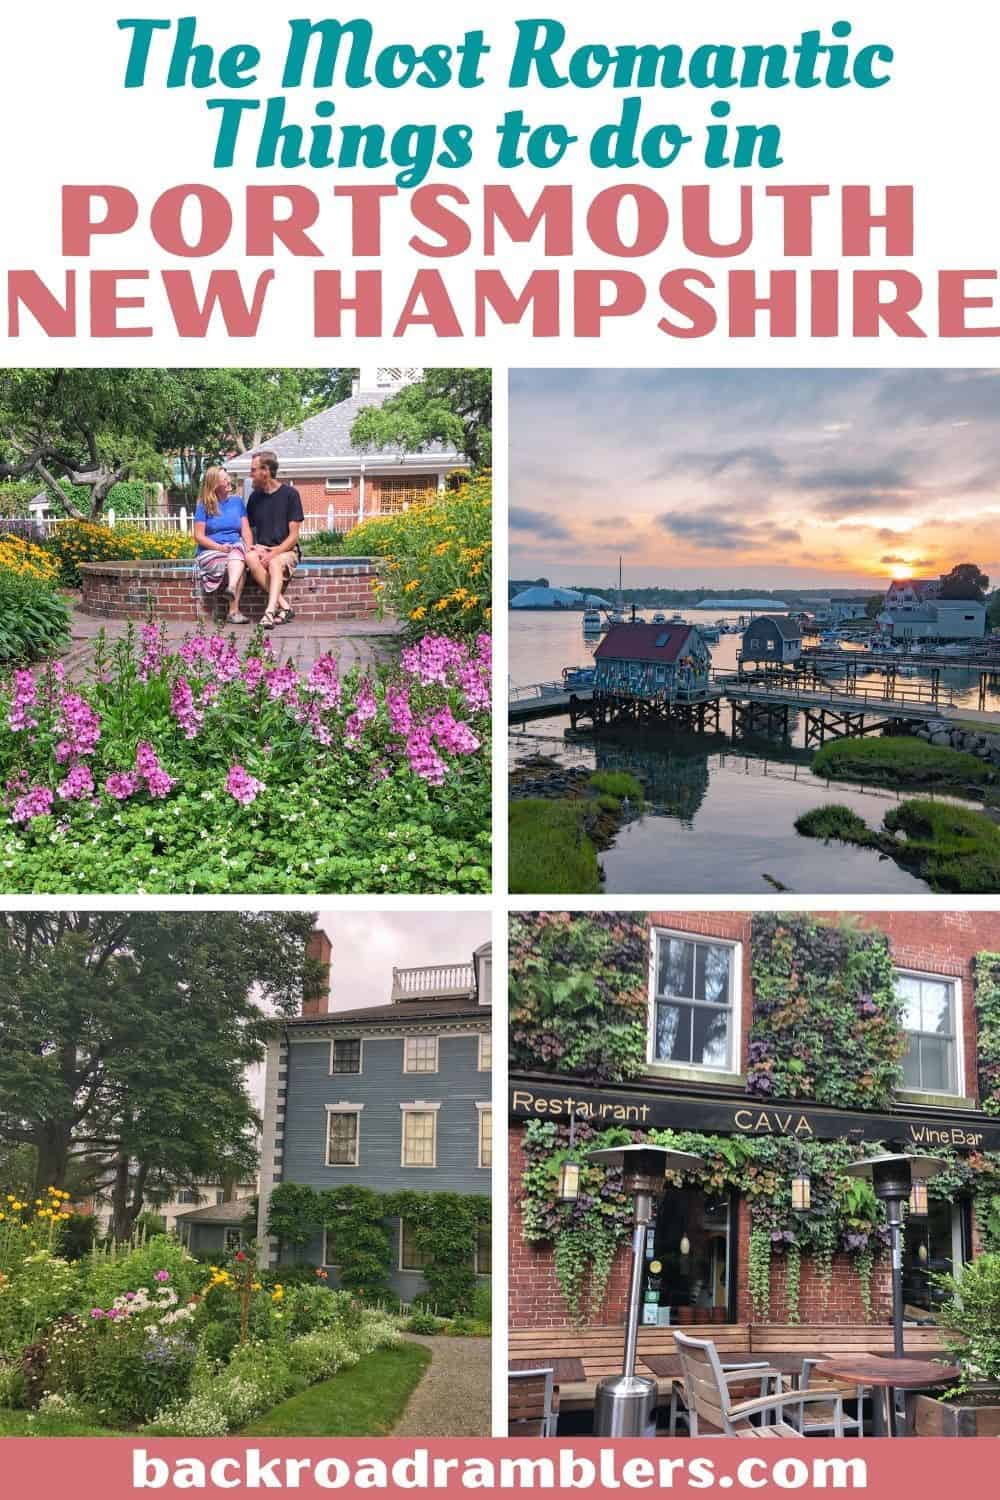 A collage of photos featuring romantic things to do in Portsmouth, NH.